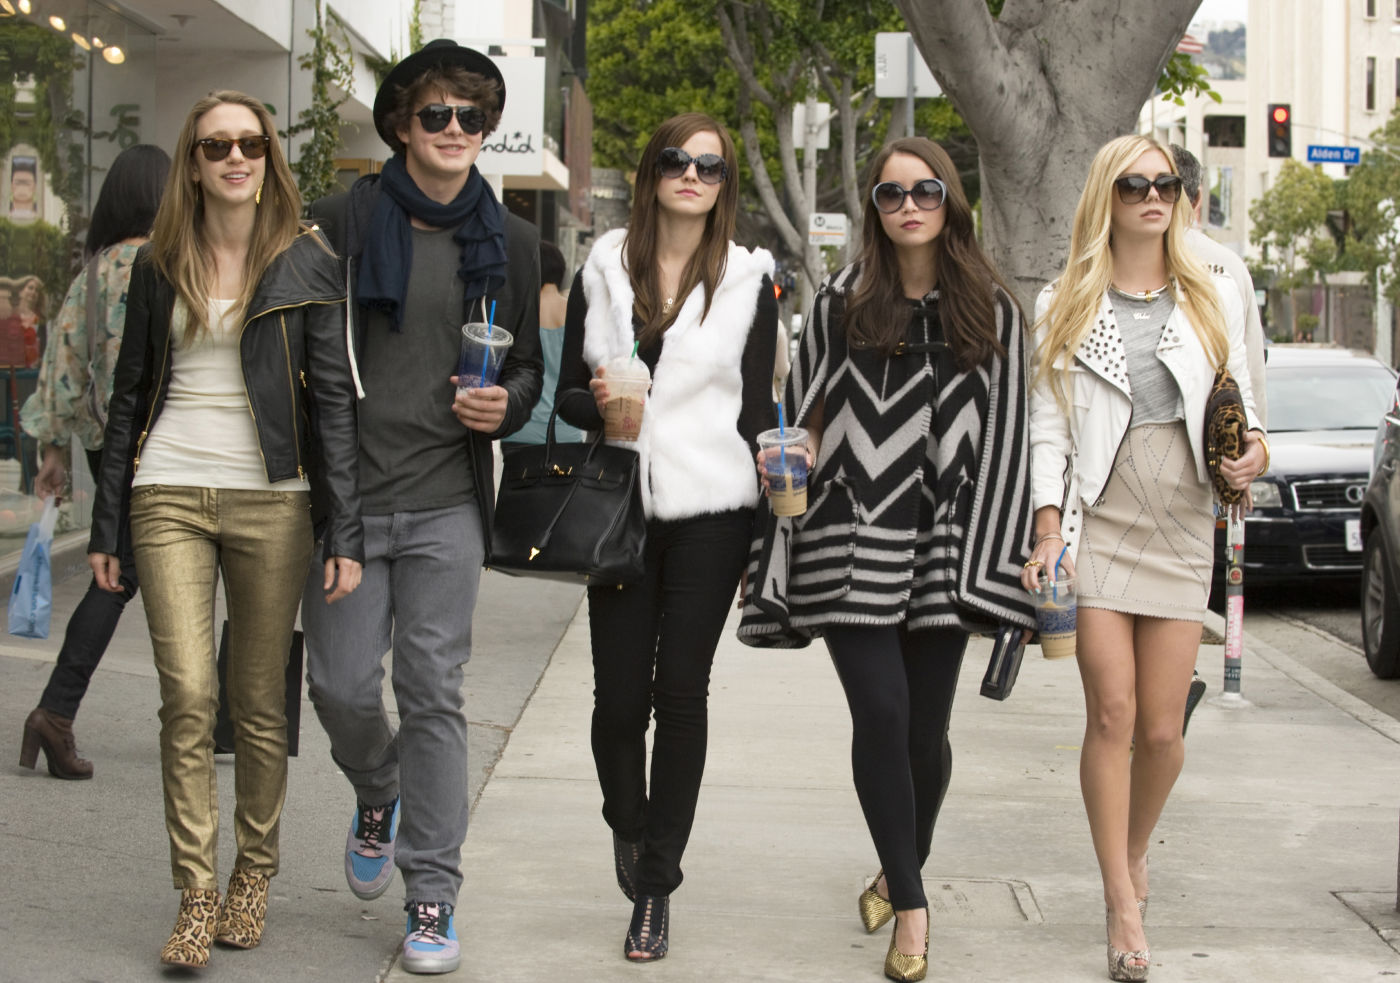 Still image from The Bling Ring